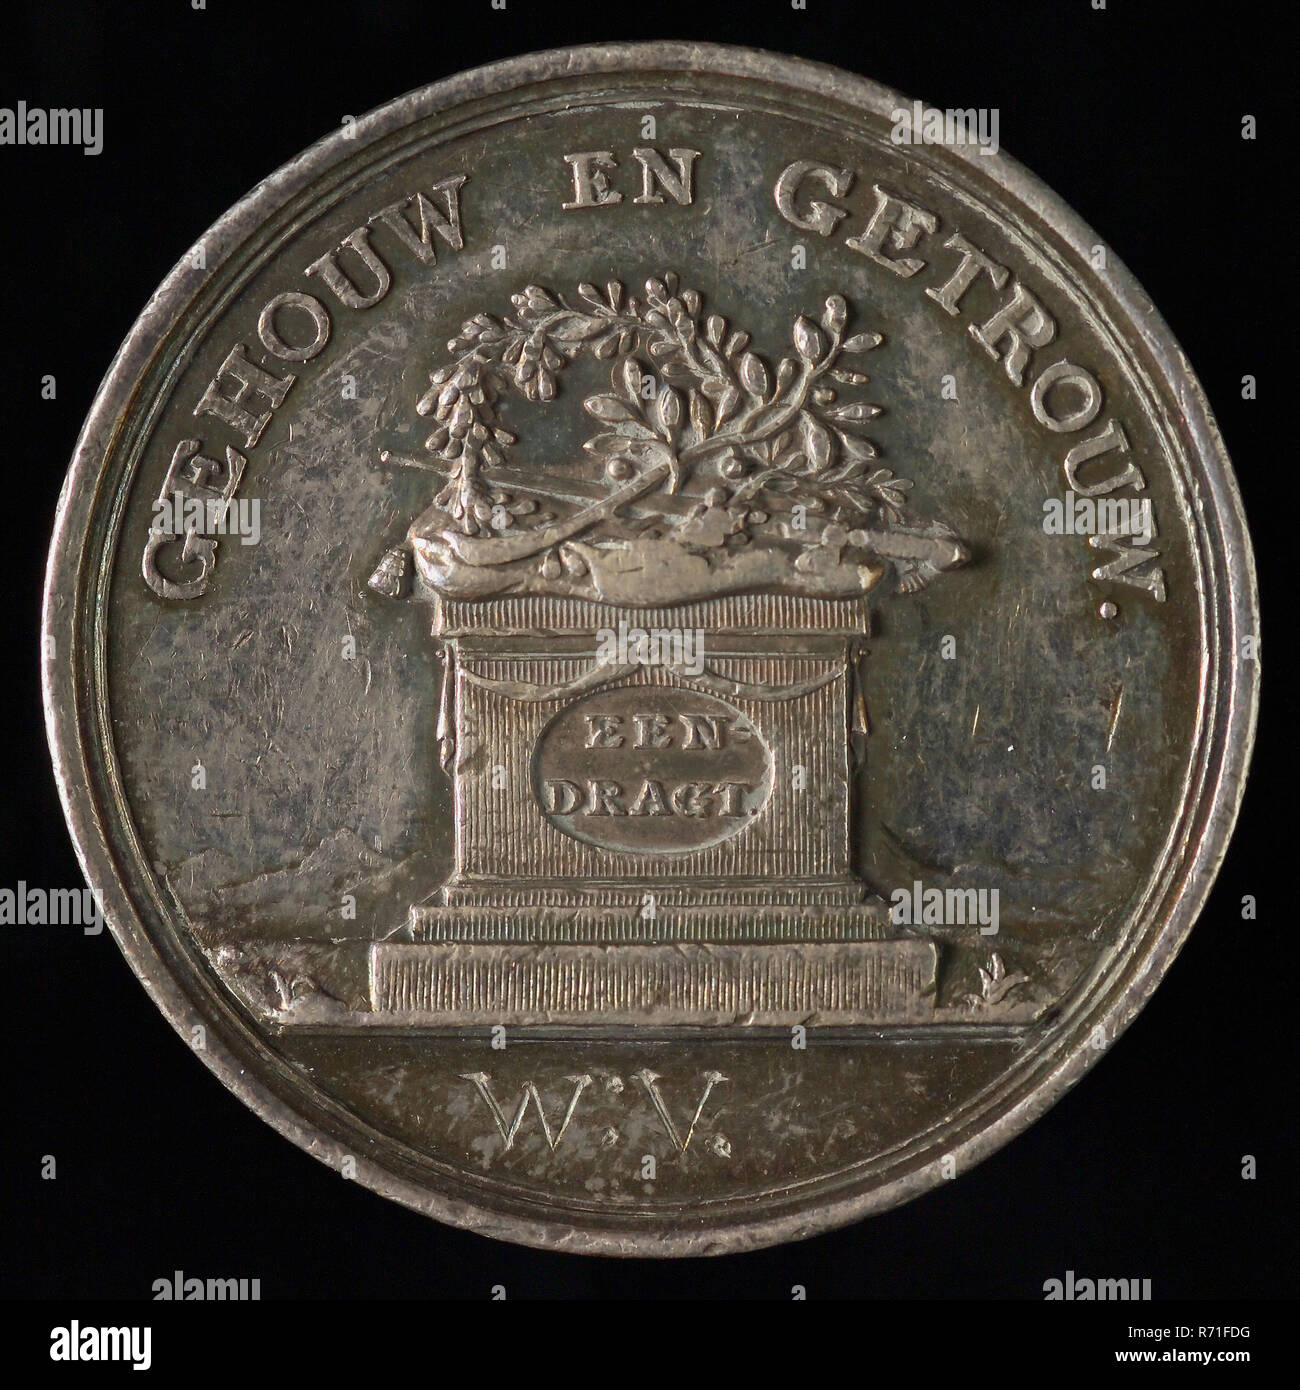 Medal on the preserved peace in the city of Rotterdam, penning footage silver, Weapon of Rotterdam between S and C; underneath suspended cloth on which text, Erkentenis for the preserved Rust within the City at the repair of 's-Lands lawful Constitution Ao. 1787 Rotterdam kept calm Stock Photo